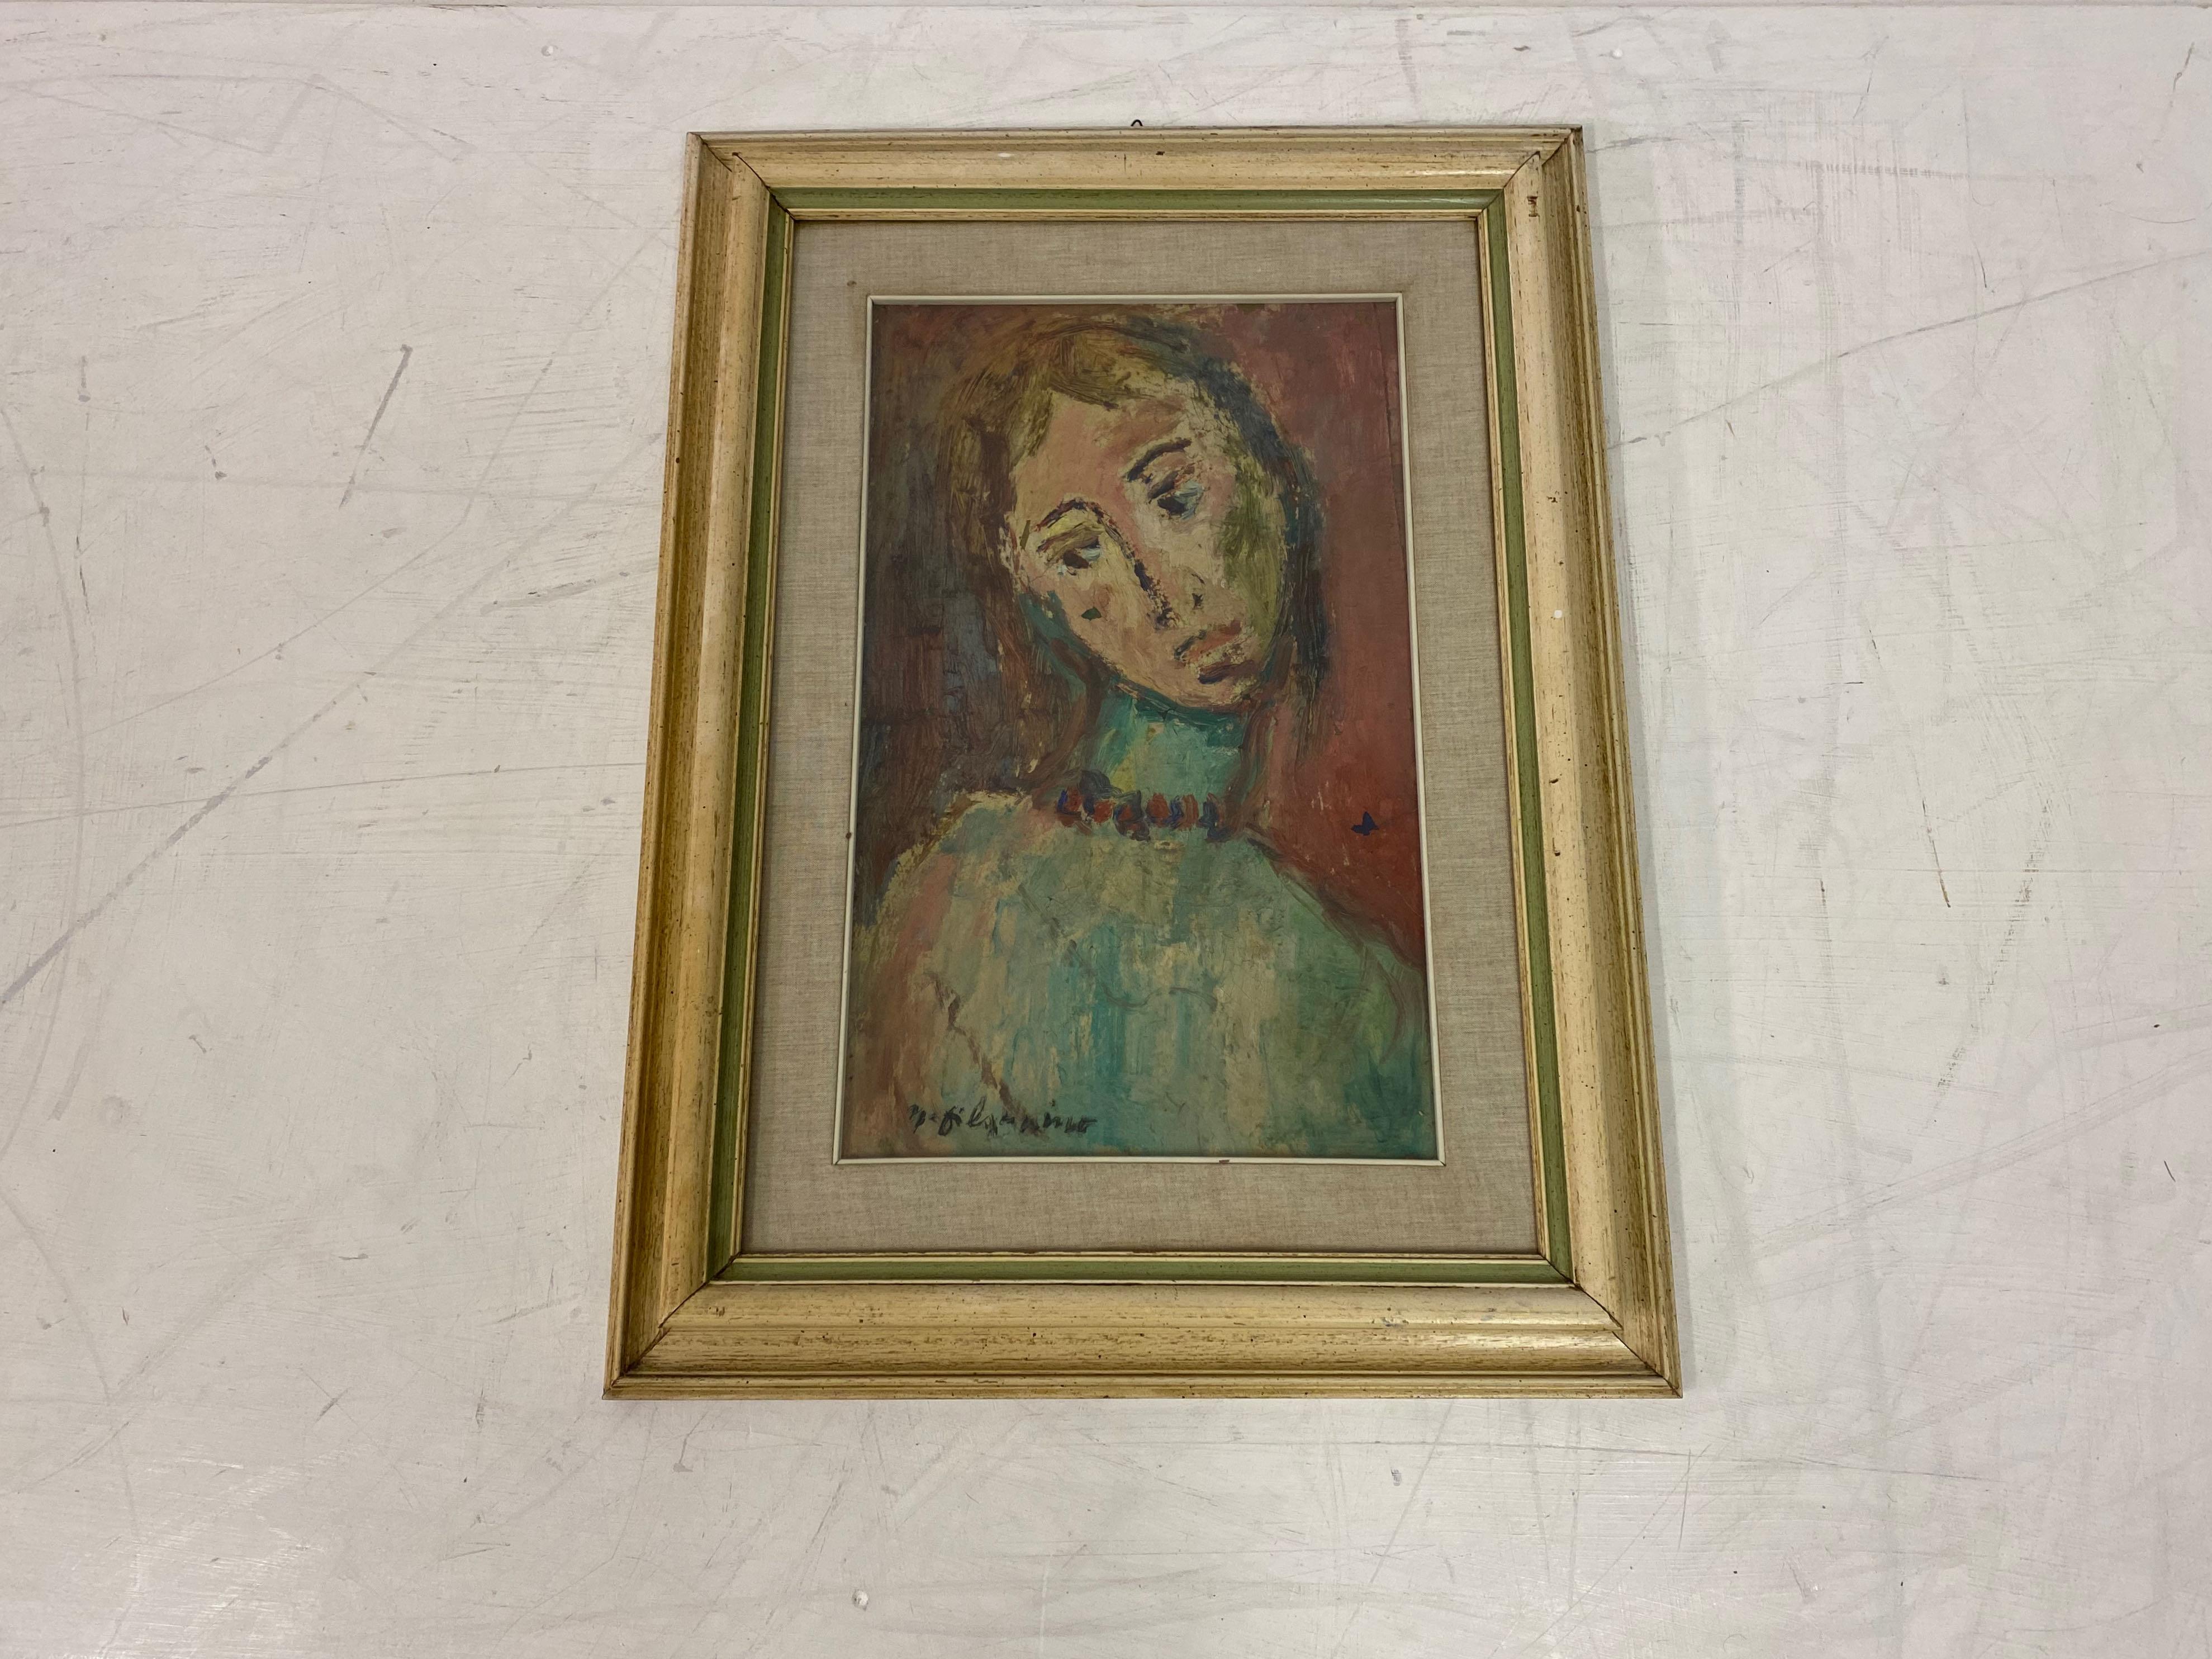 Portrait of a woman

Framed and glazed

Signed

Italian Mid Century.